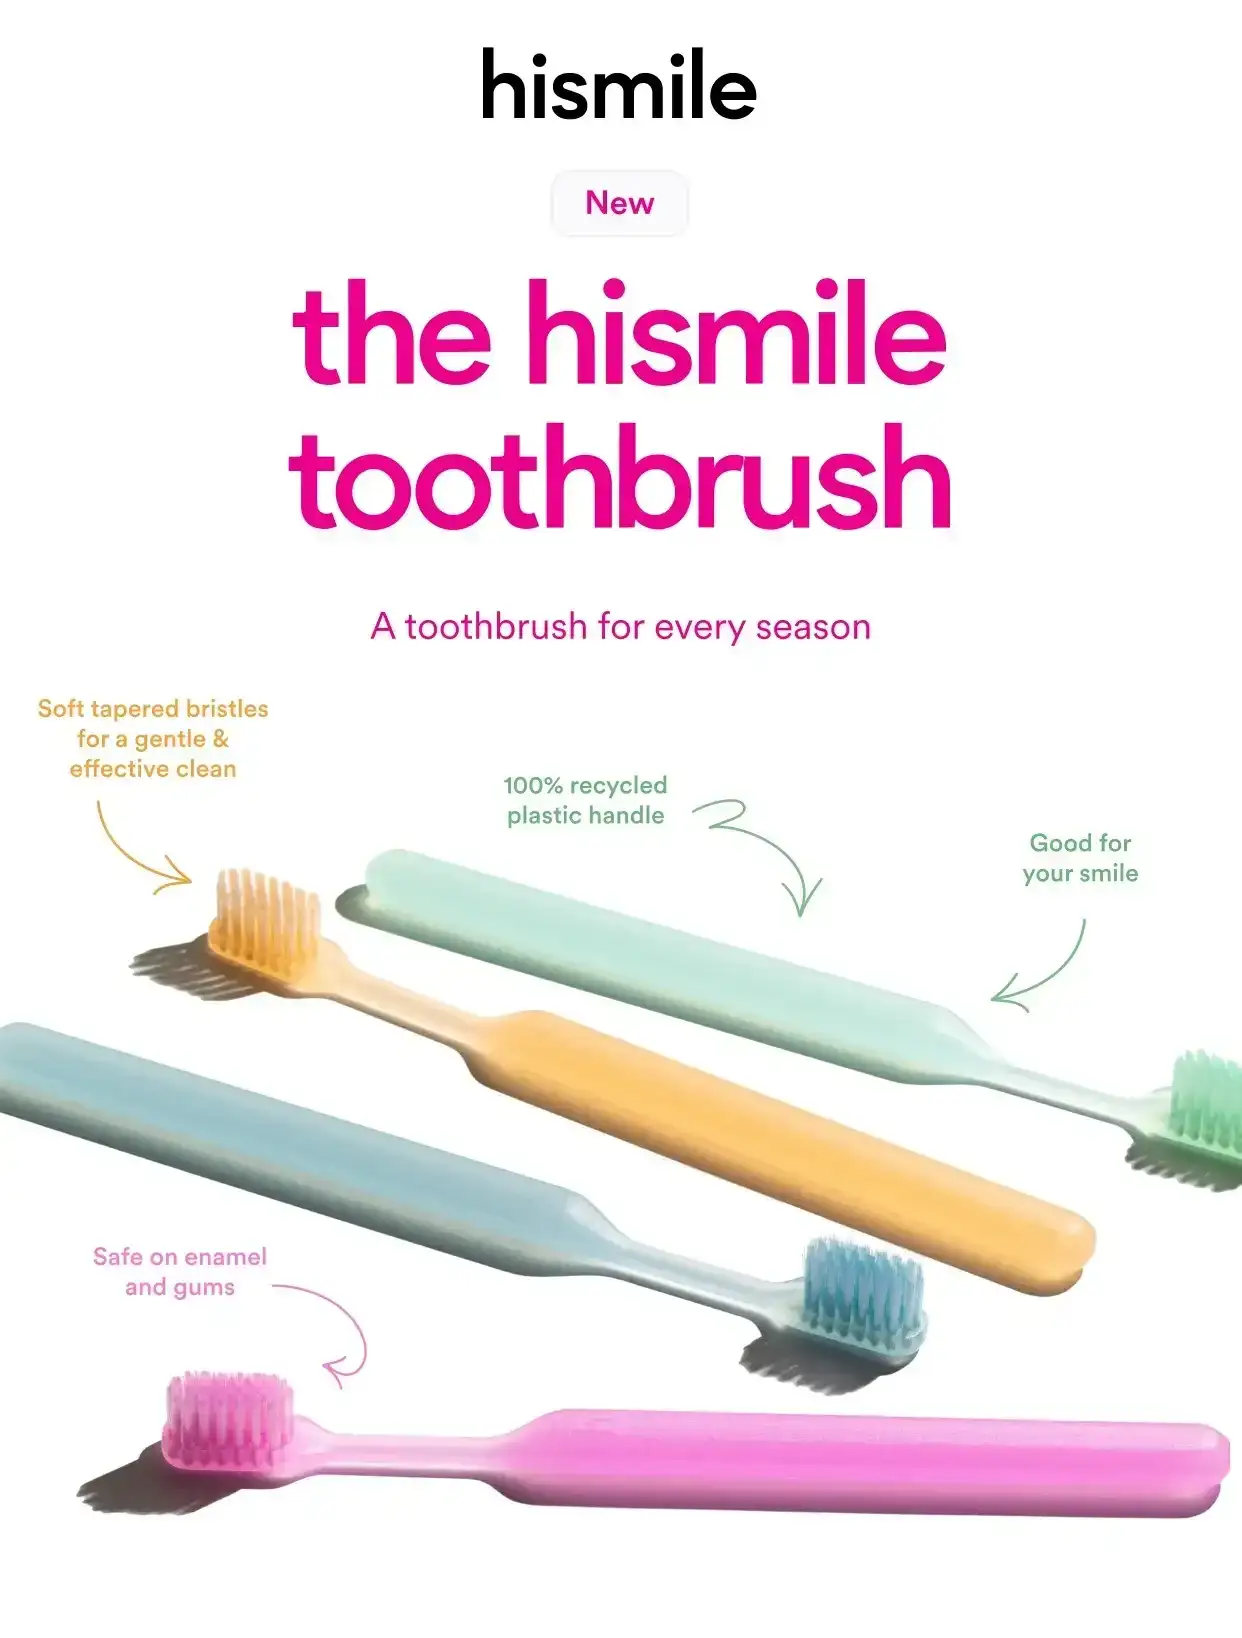 The new hismile toothbrush. A toothbrush for every season. Soft tapered bristles for a gentle and effective clean. 100 percent recycled plastic handle. Good for your smile. Safe on enamel and gums.